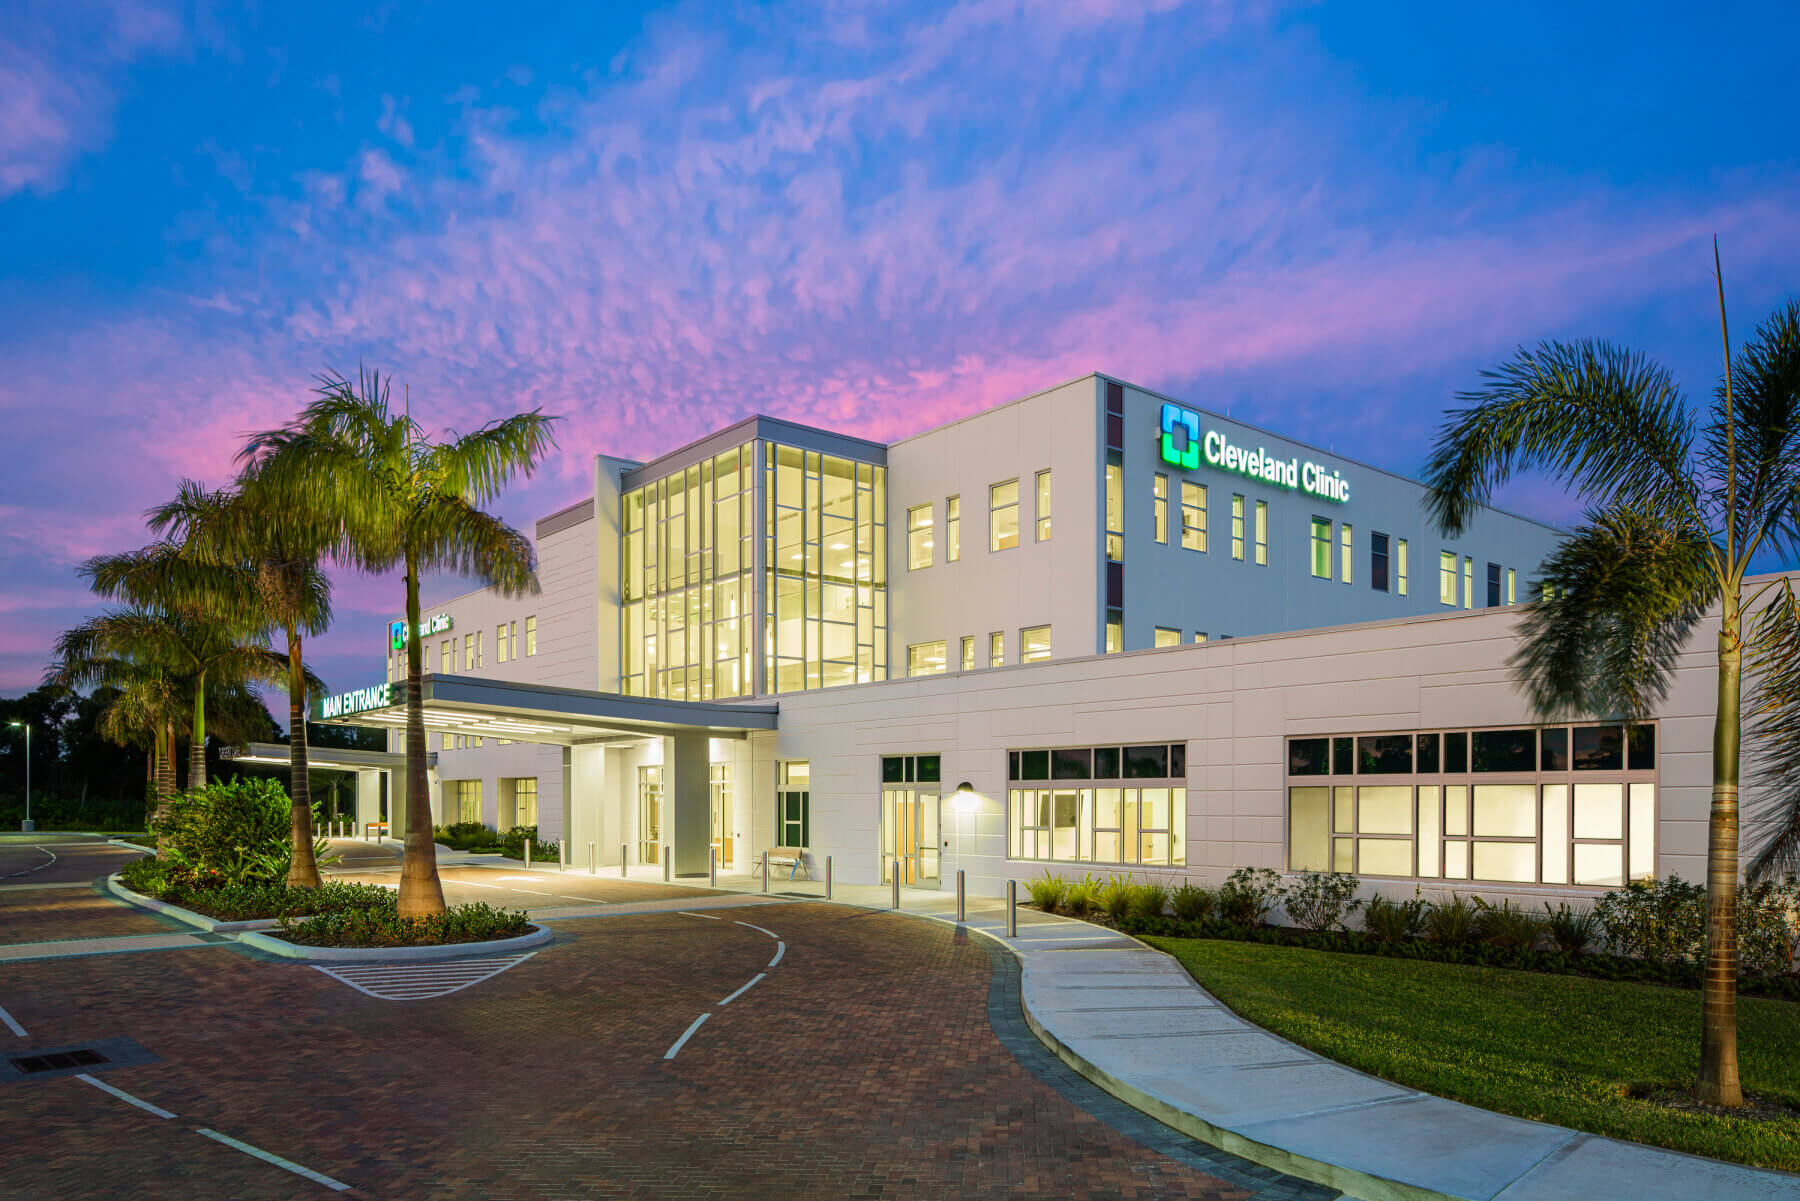 exterior of medical office building at dusk